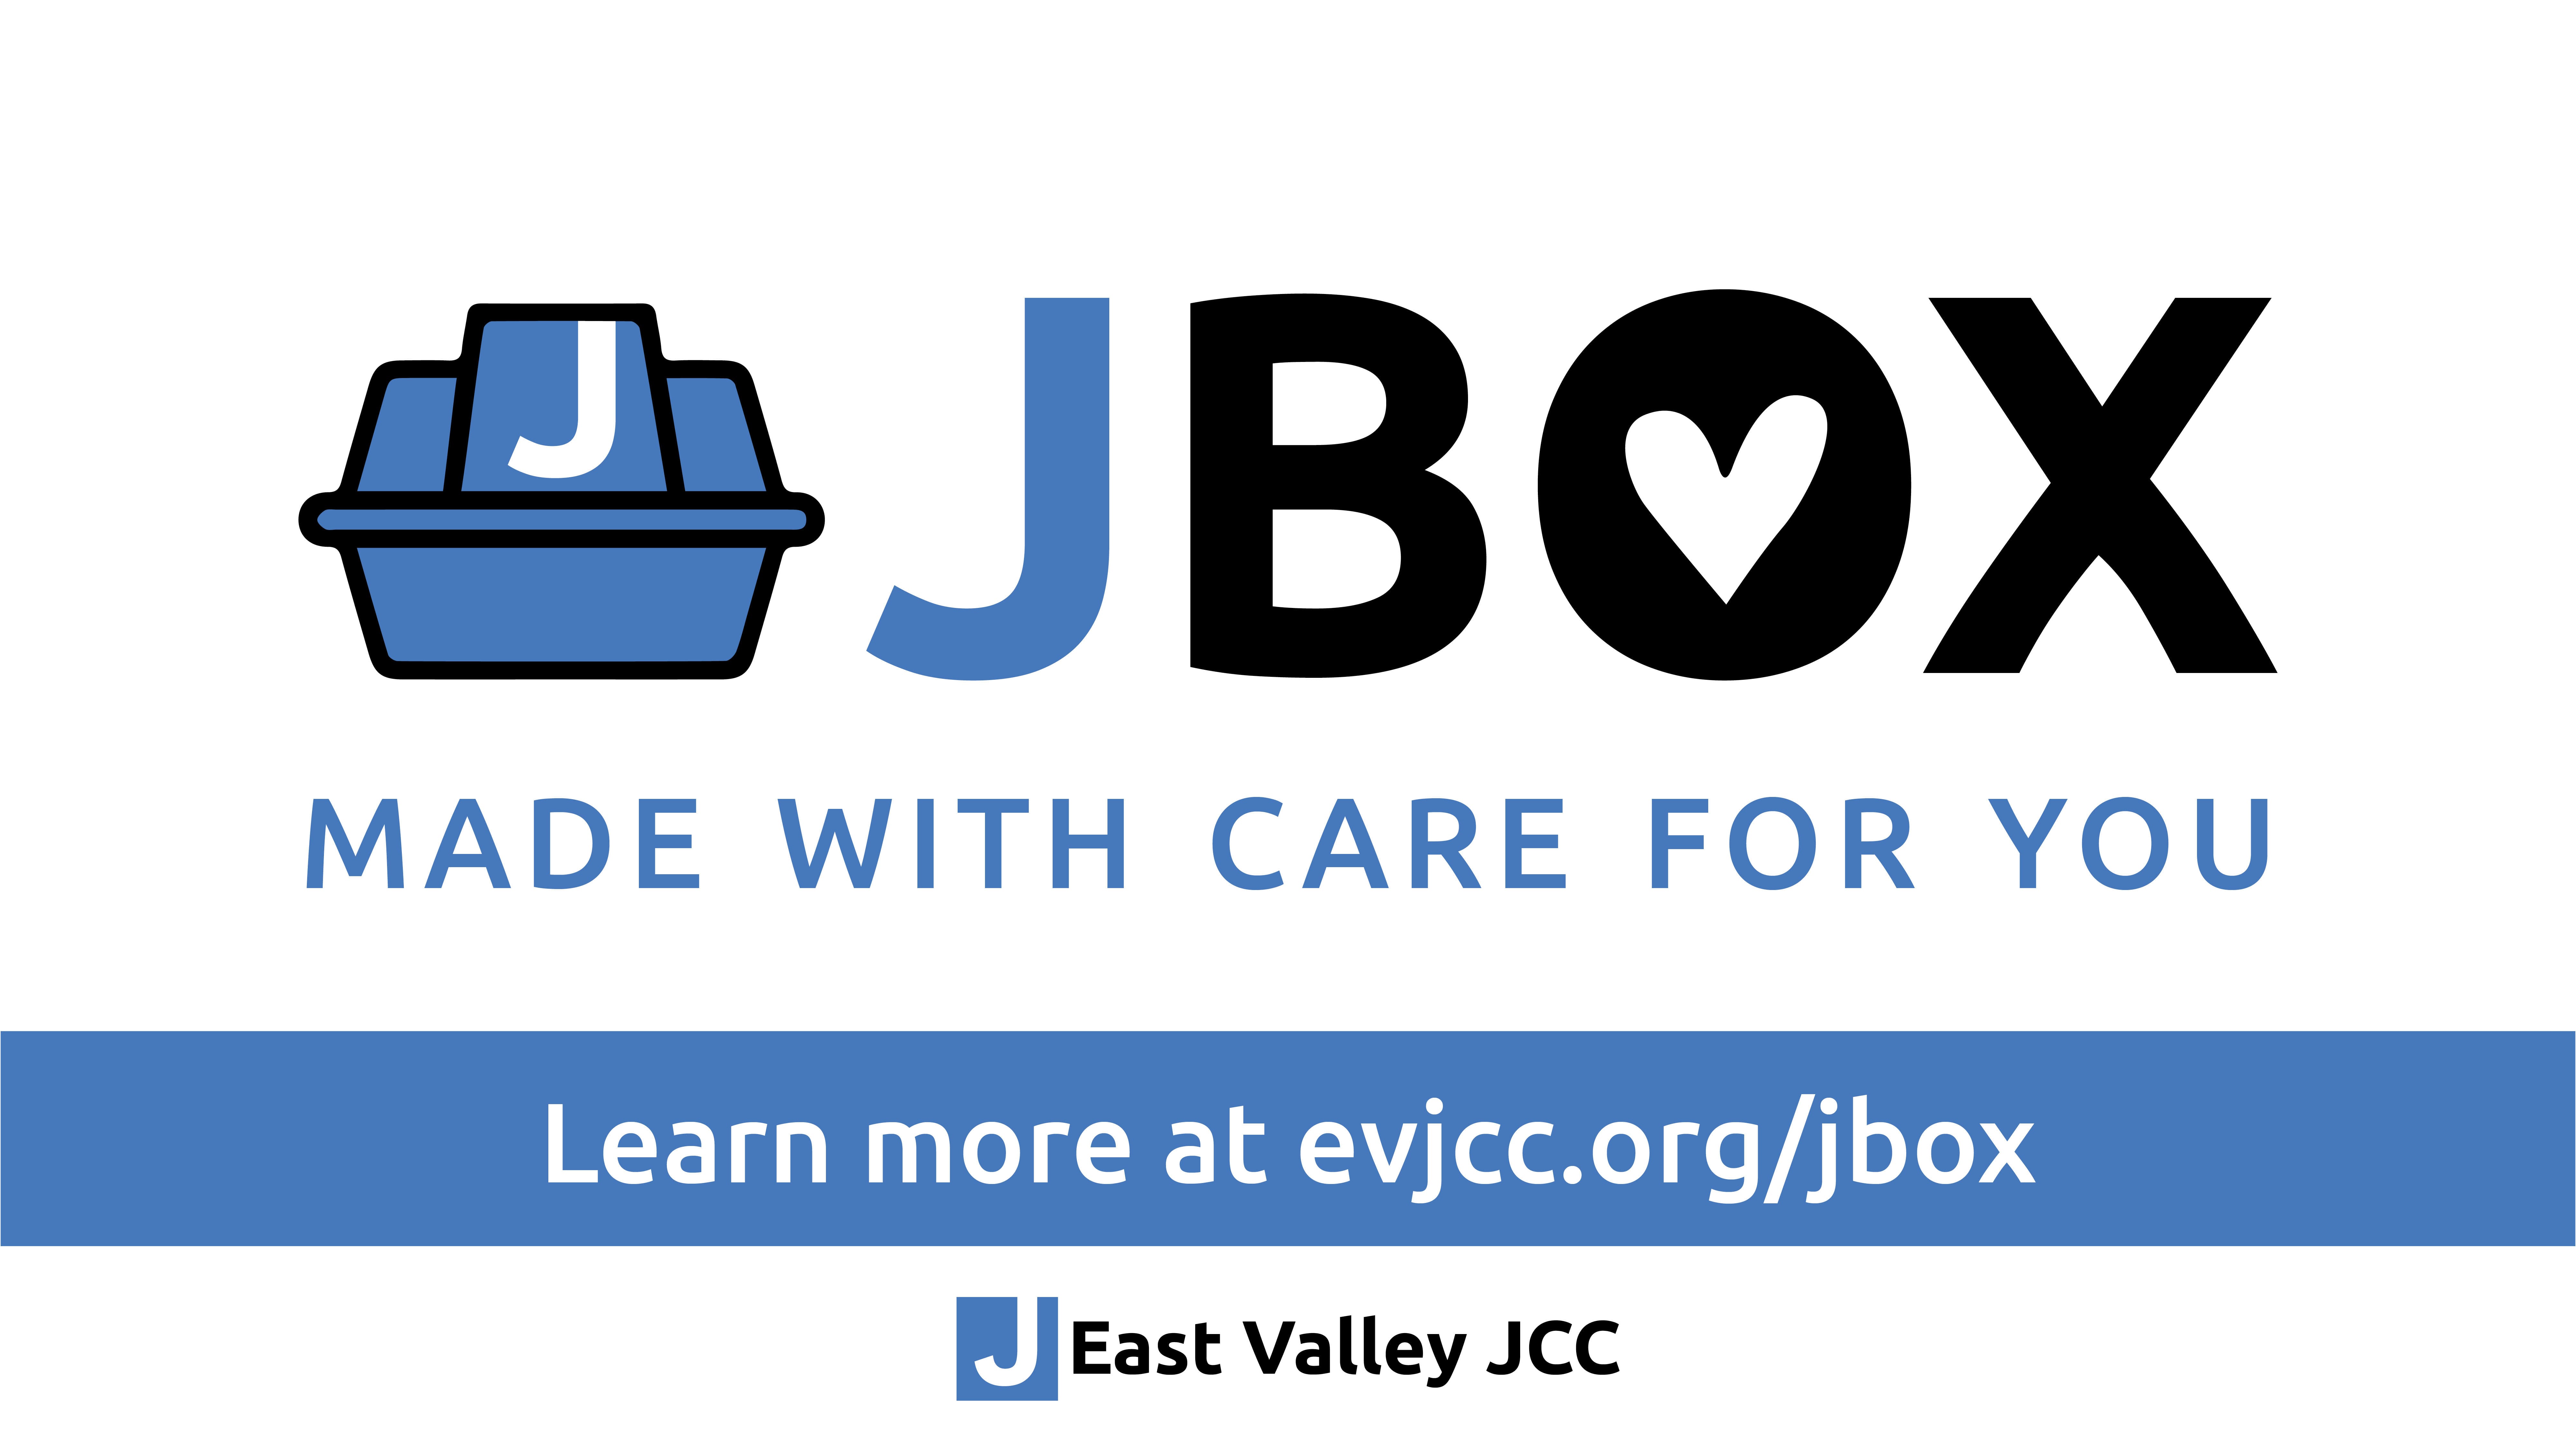 JBox to deliver kosher lunch monthly in East Valley